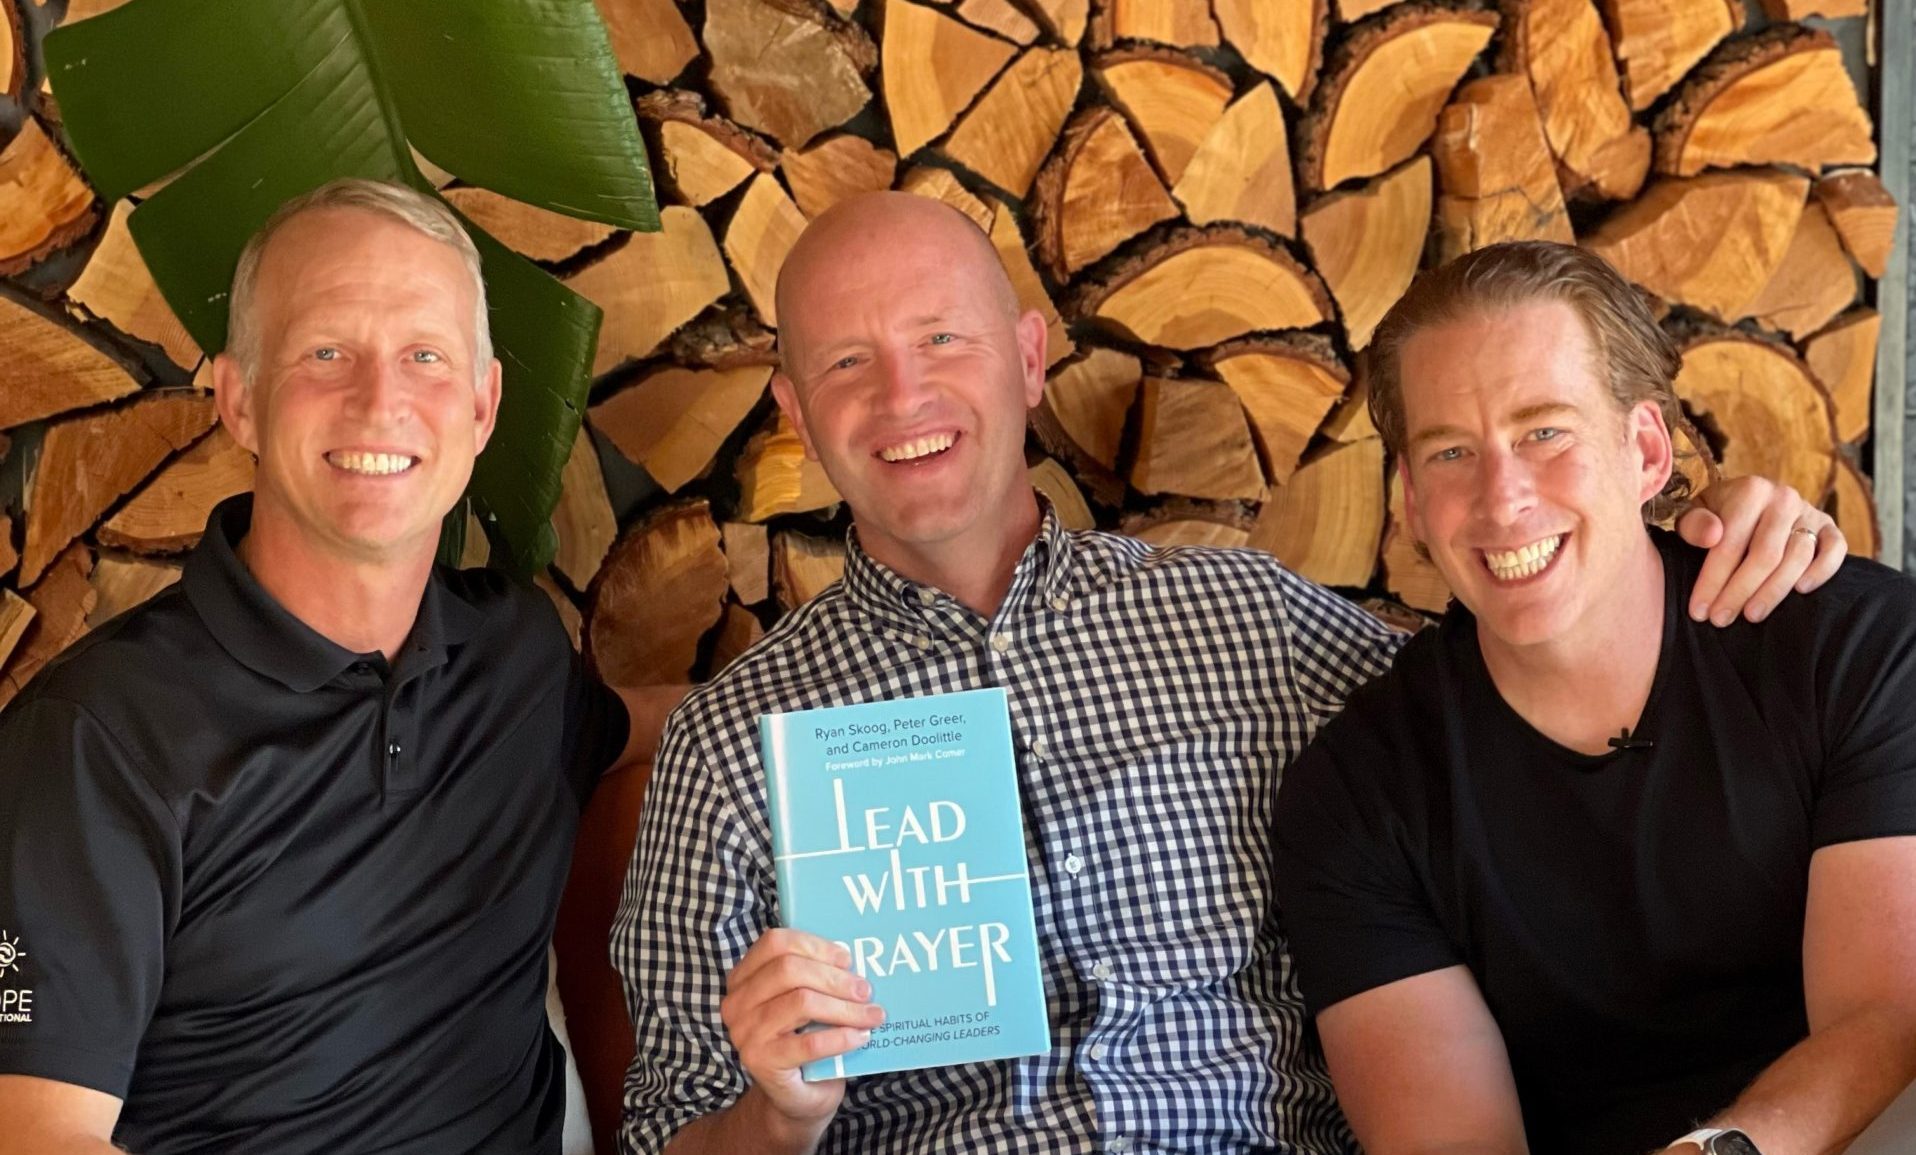 Cameron Doolittle, Peter Greer, and Ryan Skoog pose for a picture holding up their new book Lead with Prayer. Lead with Prayer has a blue cover and white letters.